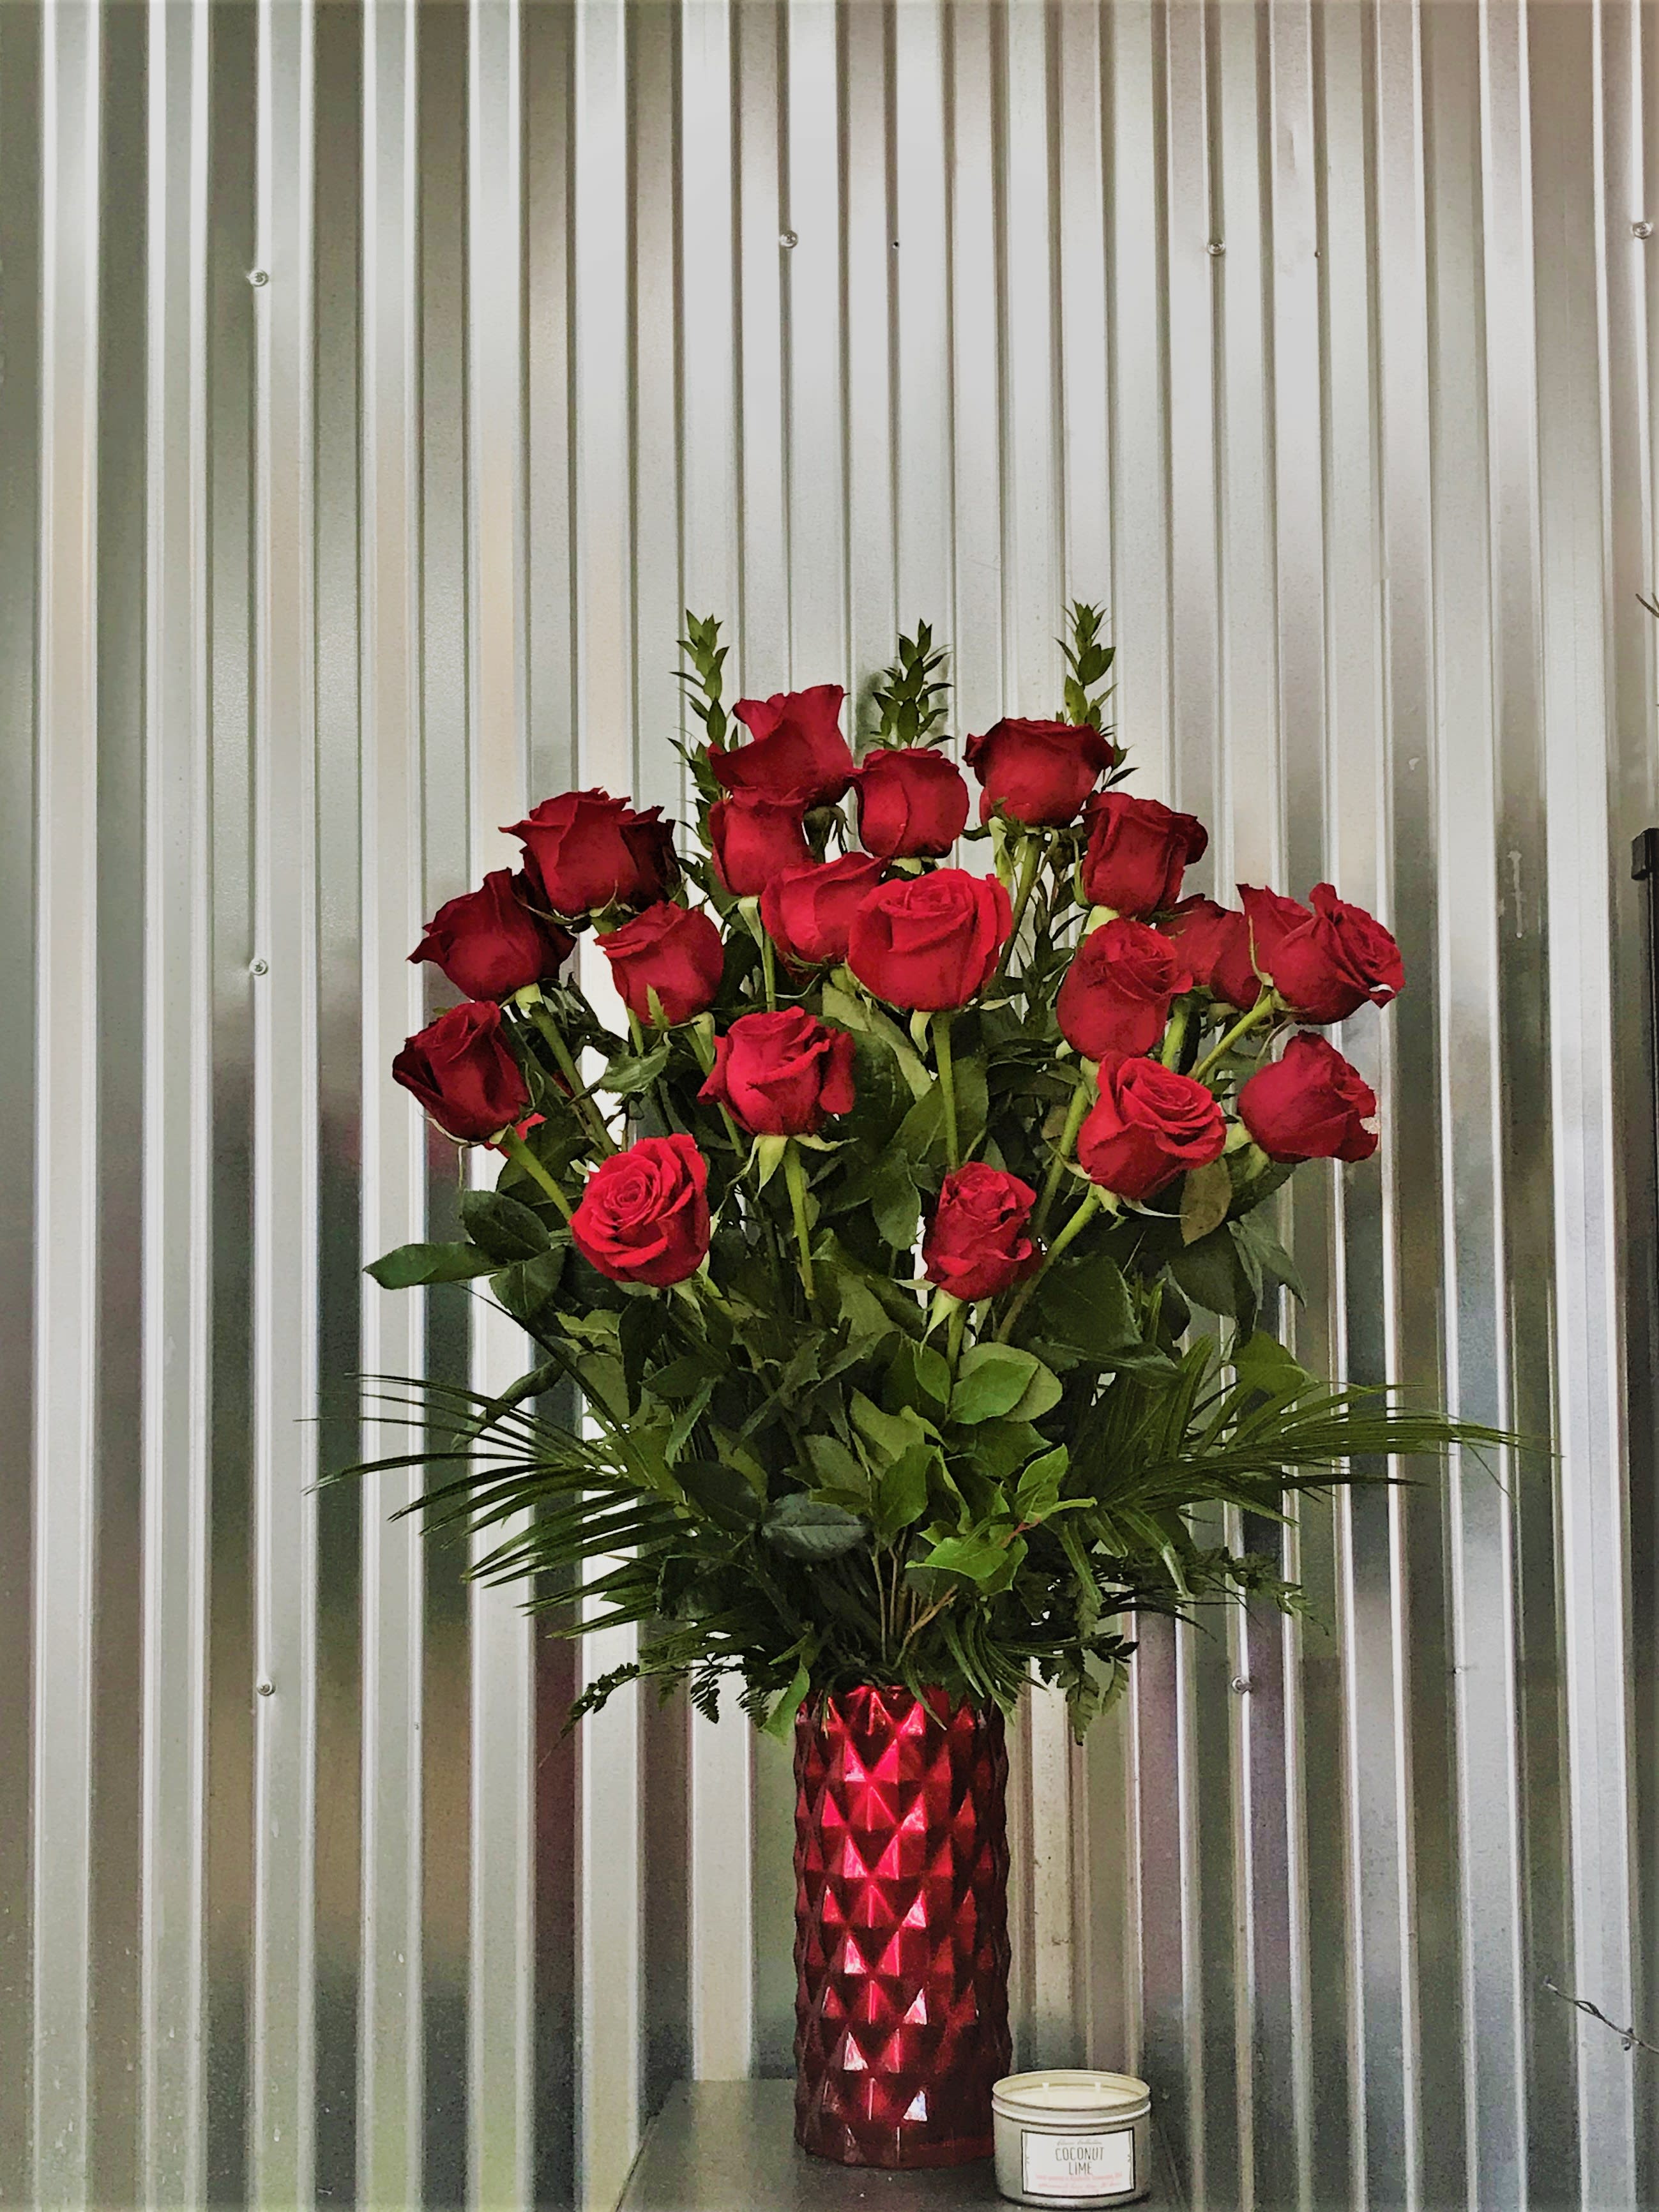 Grand Rose Bouquet - Two Dozen Red Roses - Two dozen premium red roses designed in an opulent ruby red vase. Large and beautiful, remarkably sure to make a statement for any occasion.